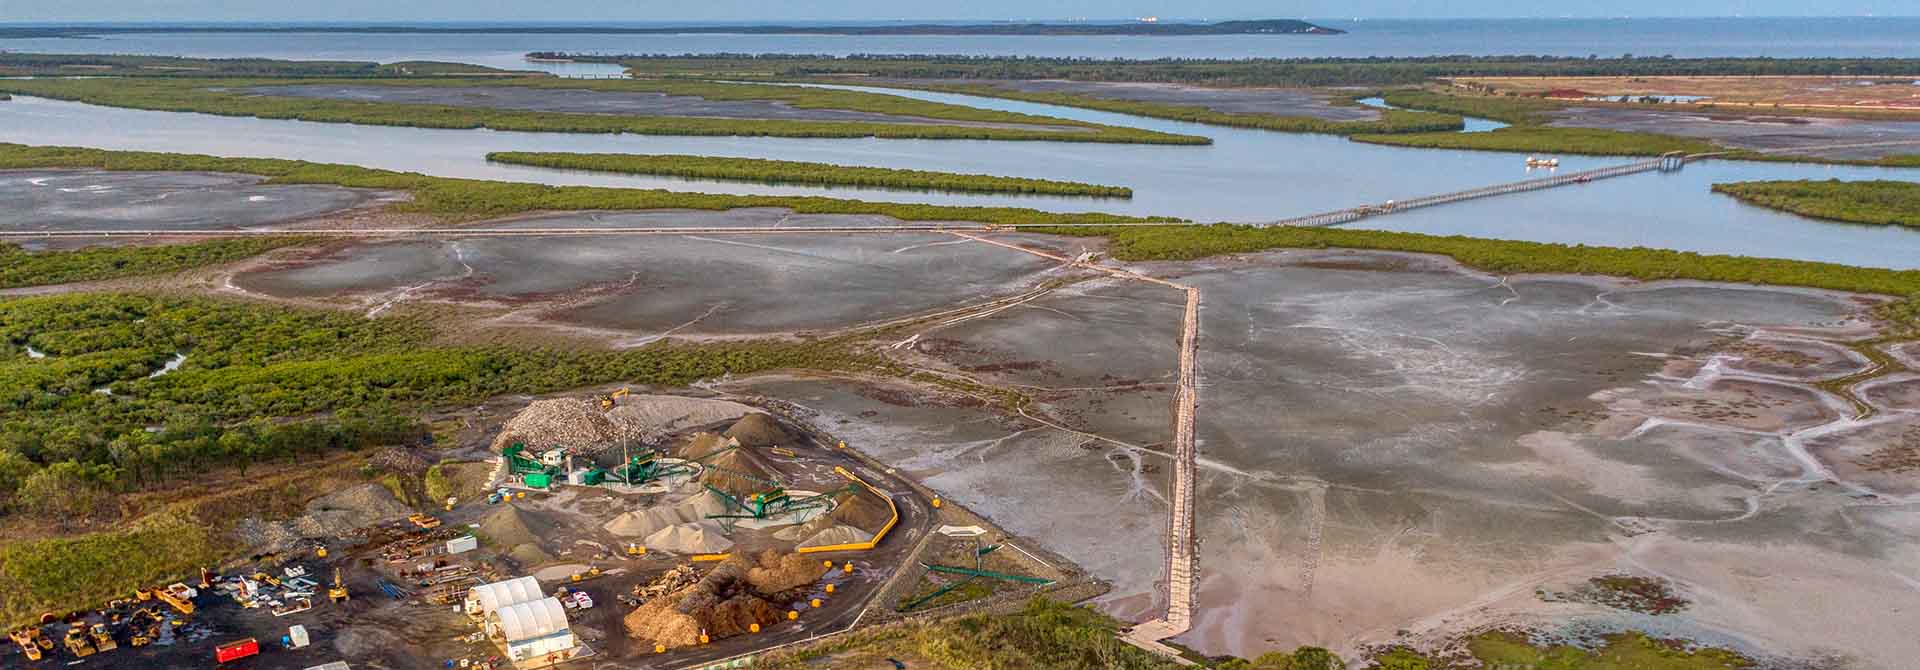 Wasteline Replacement in Tidal Flats 